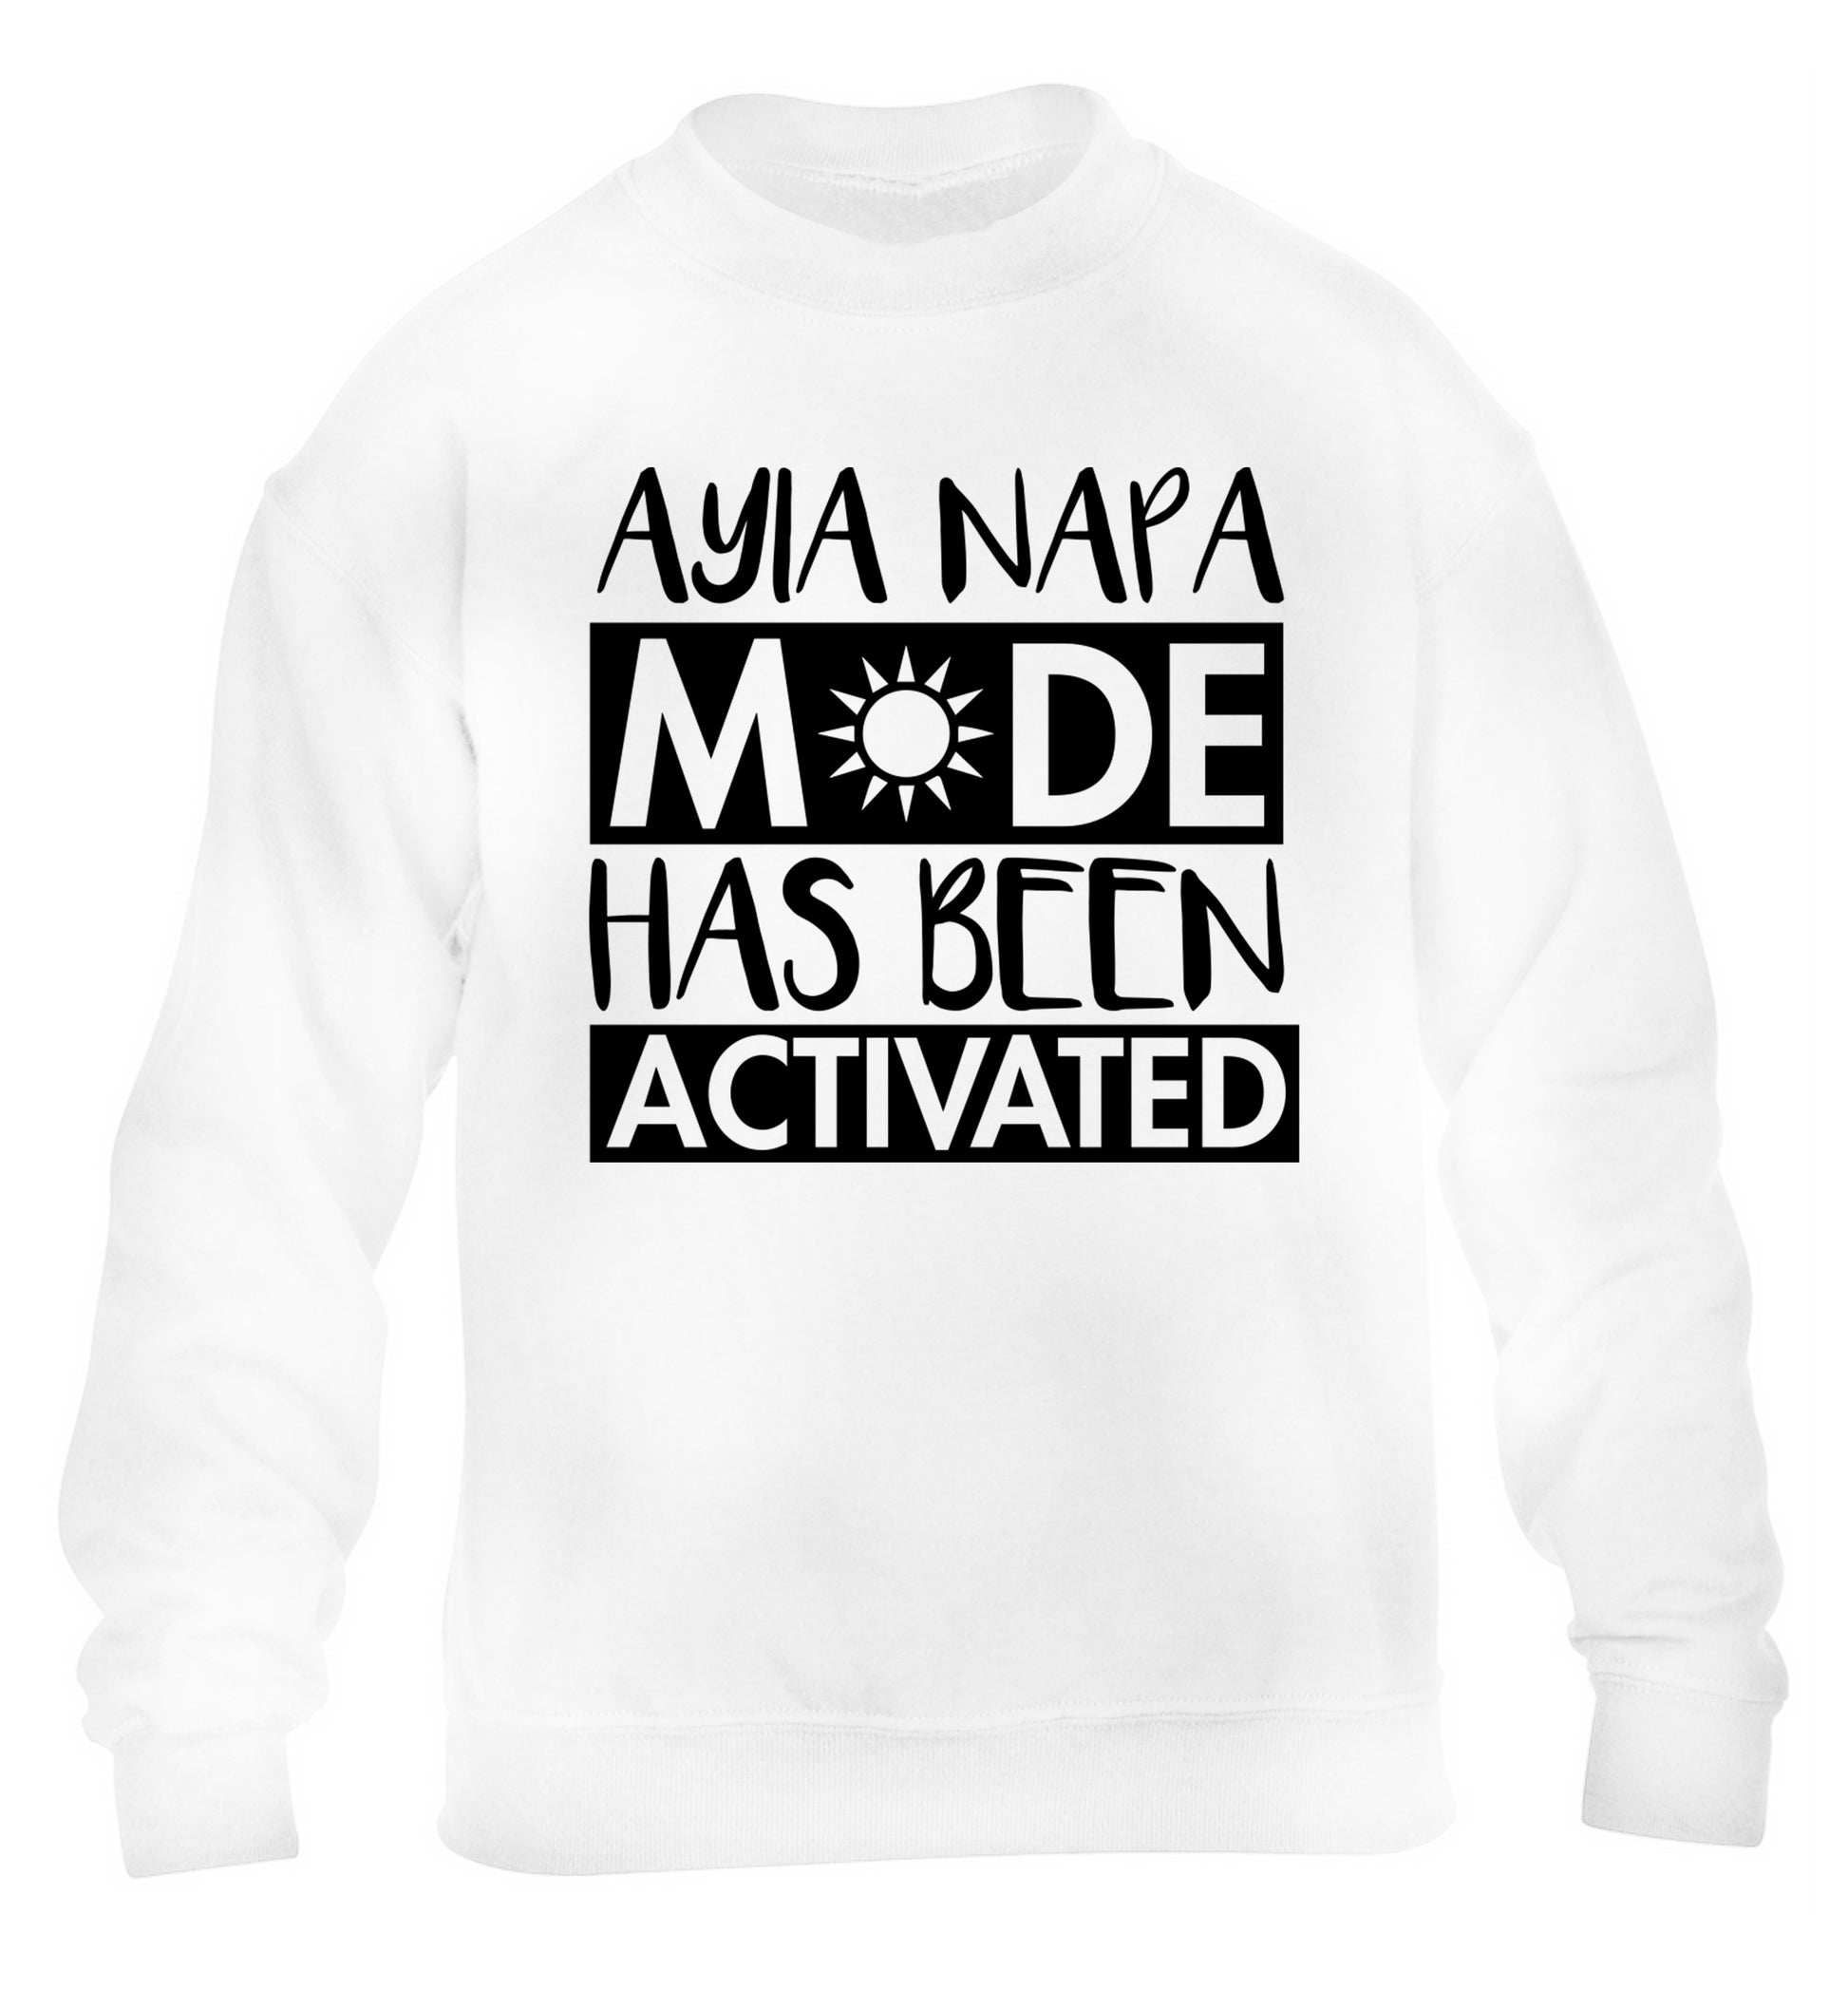 Ayia Napa mode has been activated children's white sweater 12-13 Years